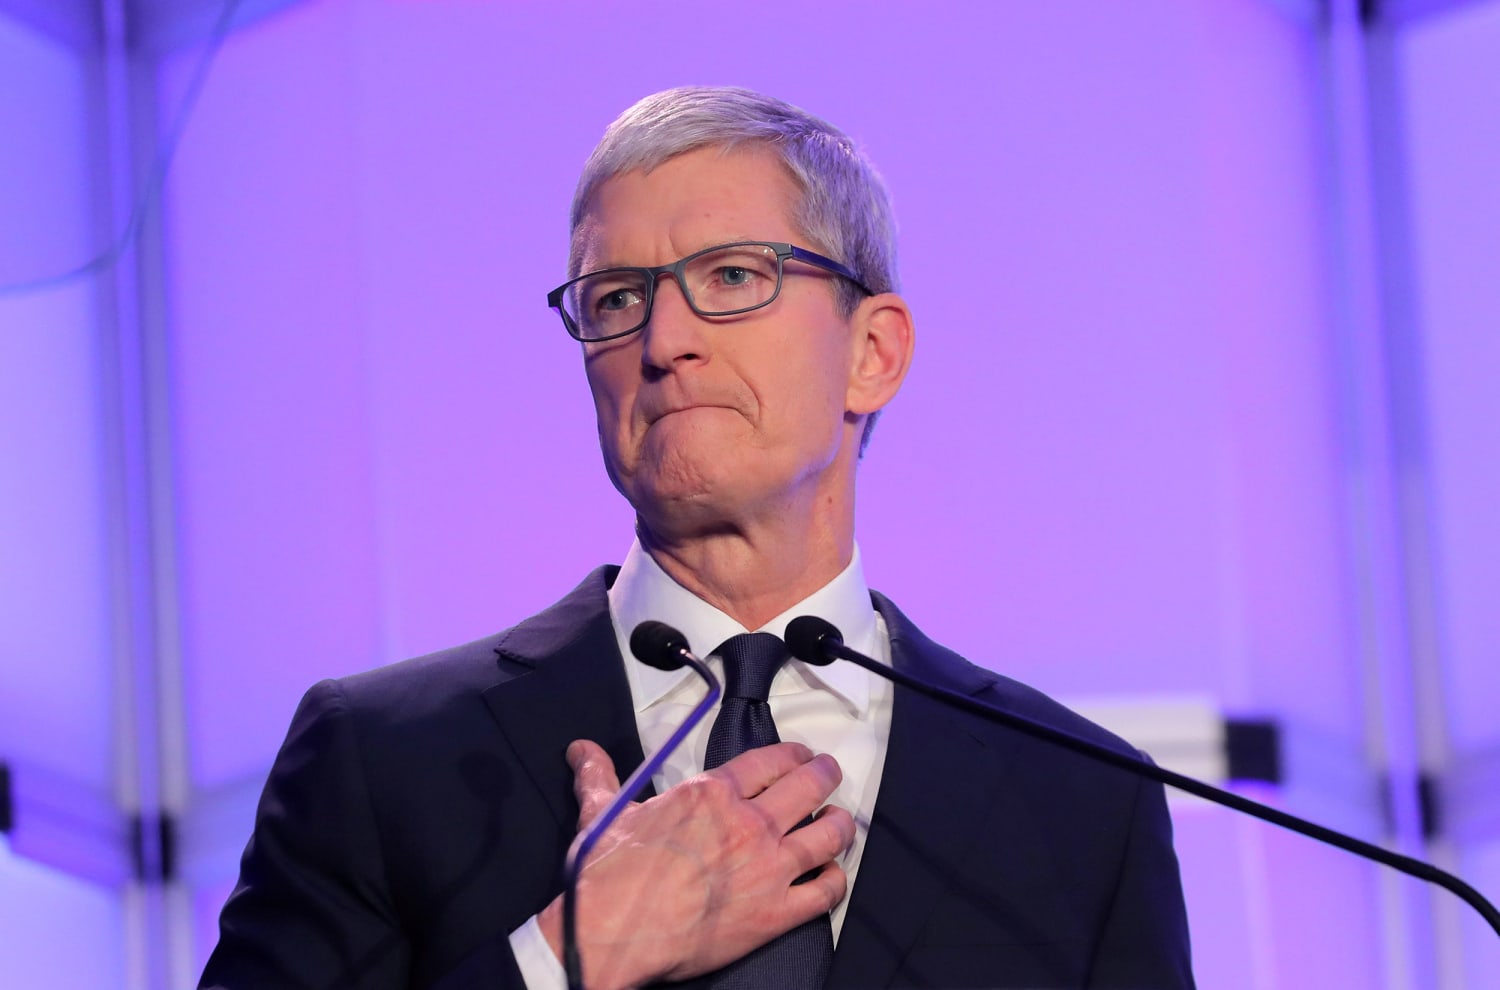 Apple CEO Tim Cook says tech needs to moral stand against hate speech